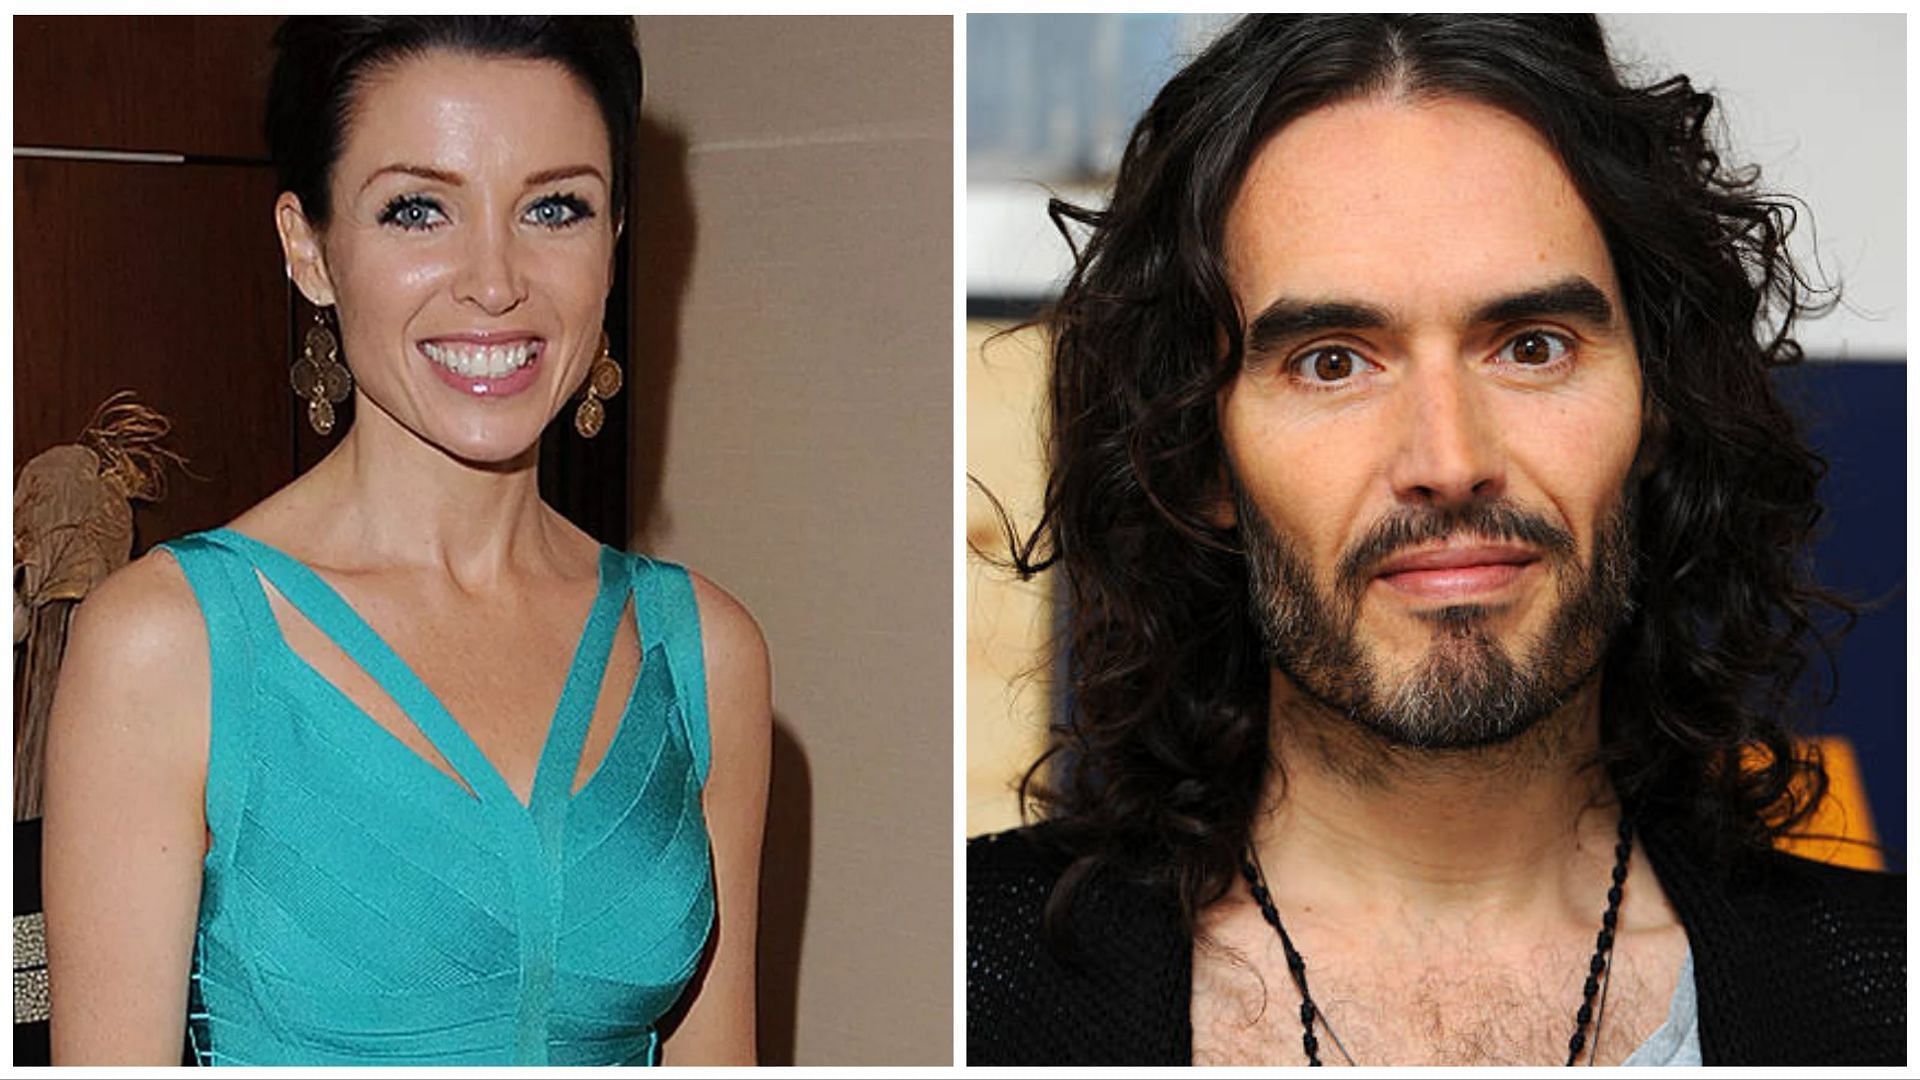 Dannii Minogue opened up about her interview with Russell Brand (Image via Getty Images)